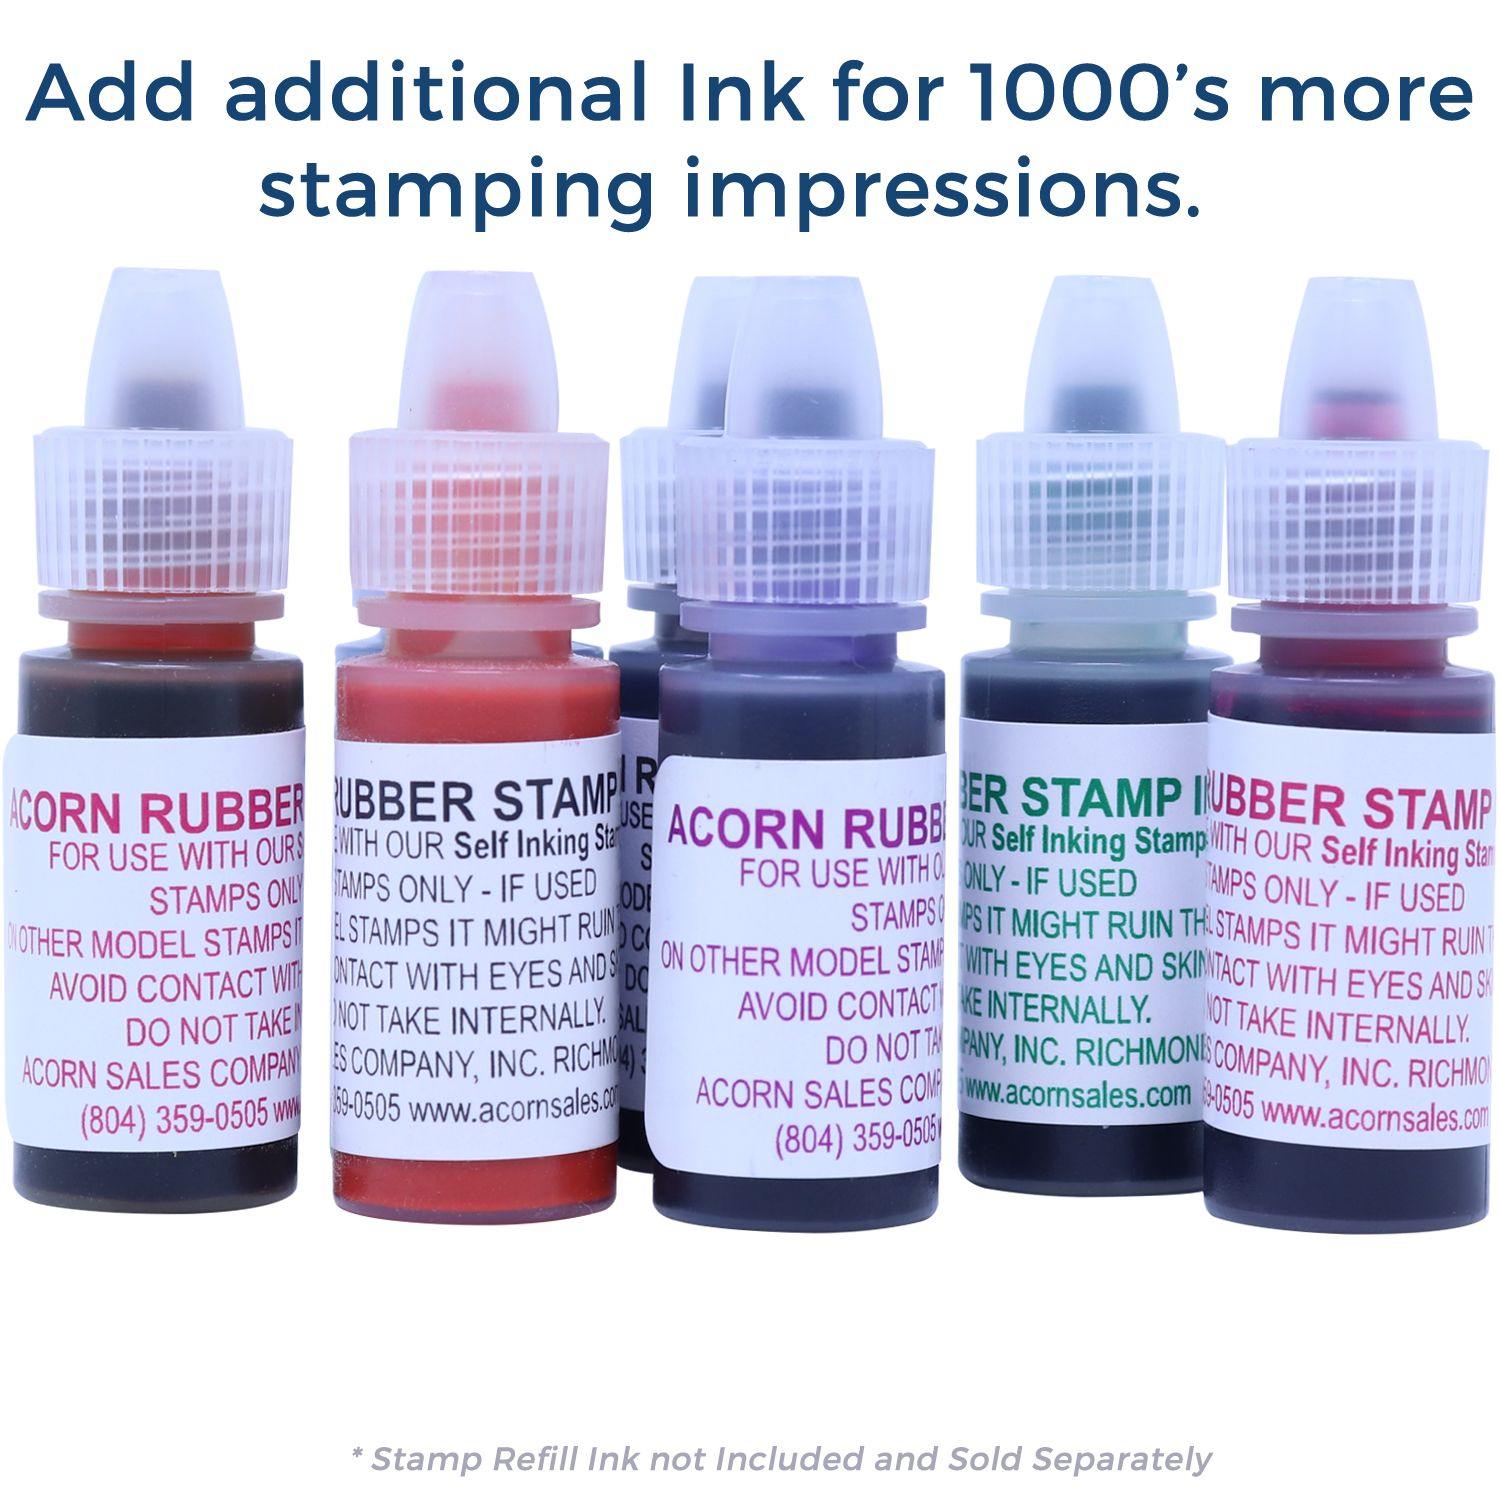 Refill Inks for Large Pre-Inked Expreso Stamp Available